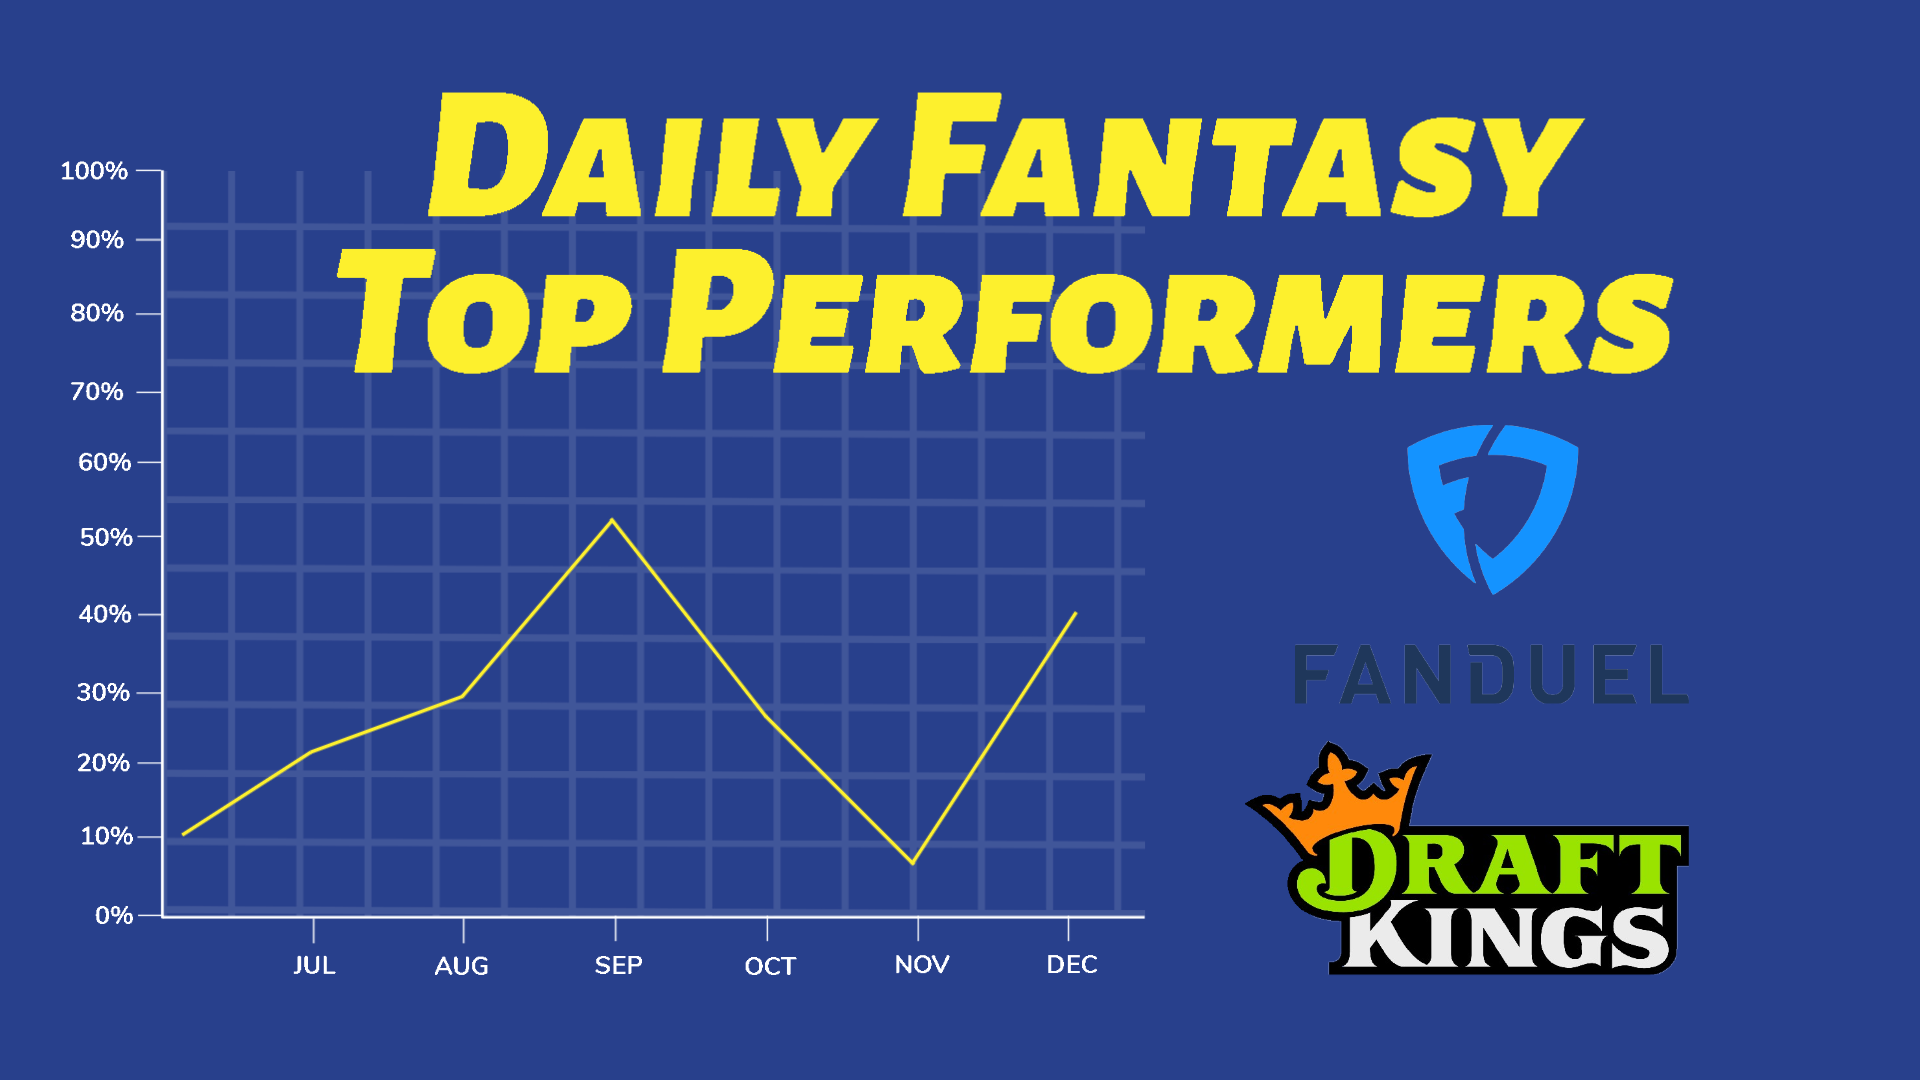 A thumbnail for an article about the top daily fantasy football players on DraftKings and Fanduel for the 2021 - 2022 NFL Season.